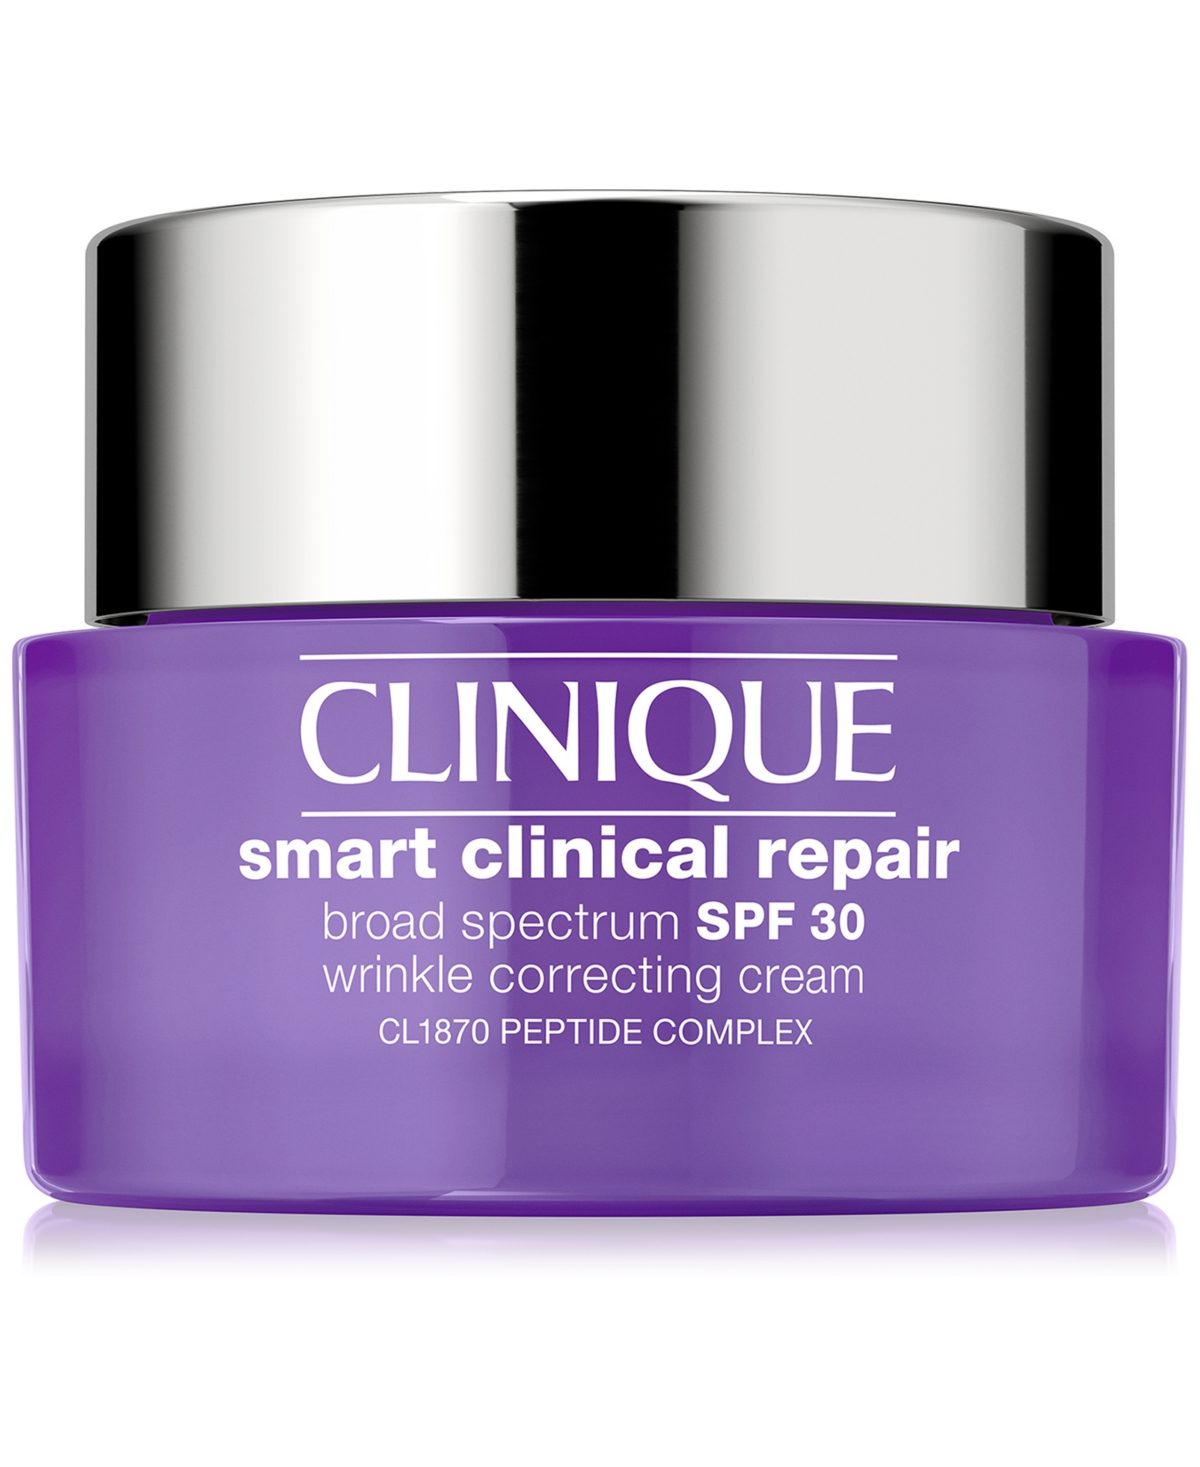 Clinique Smart Clinical Repair Wrinkle Correcting Cream Spf 30, 1.7 Oz. In No Color